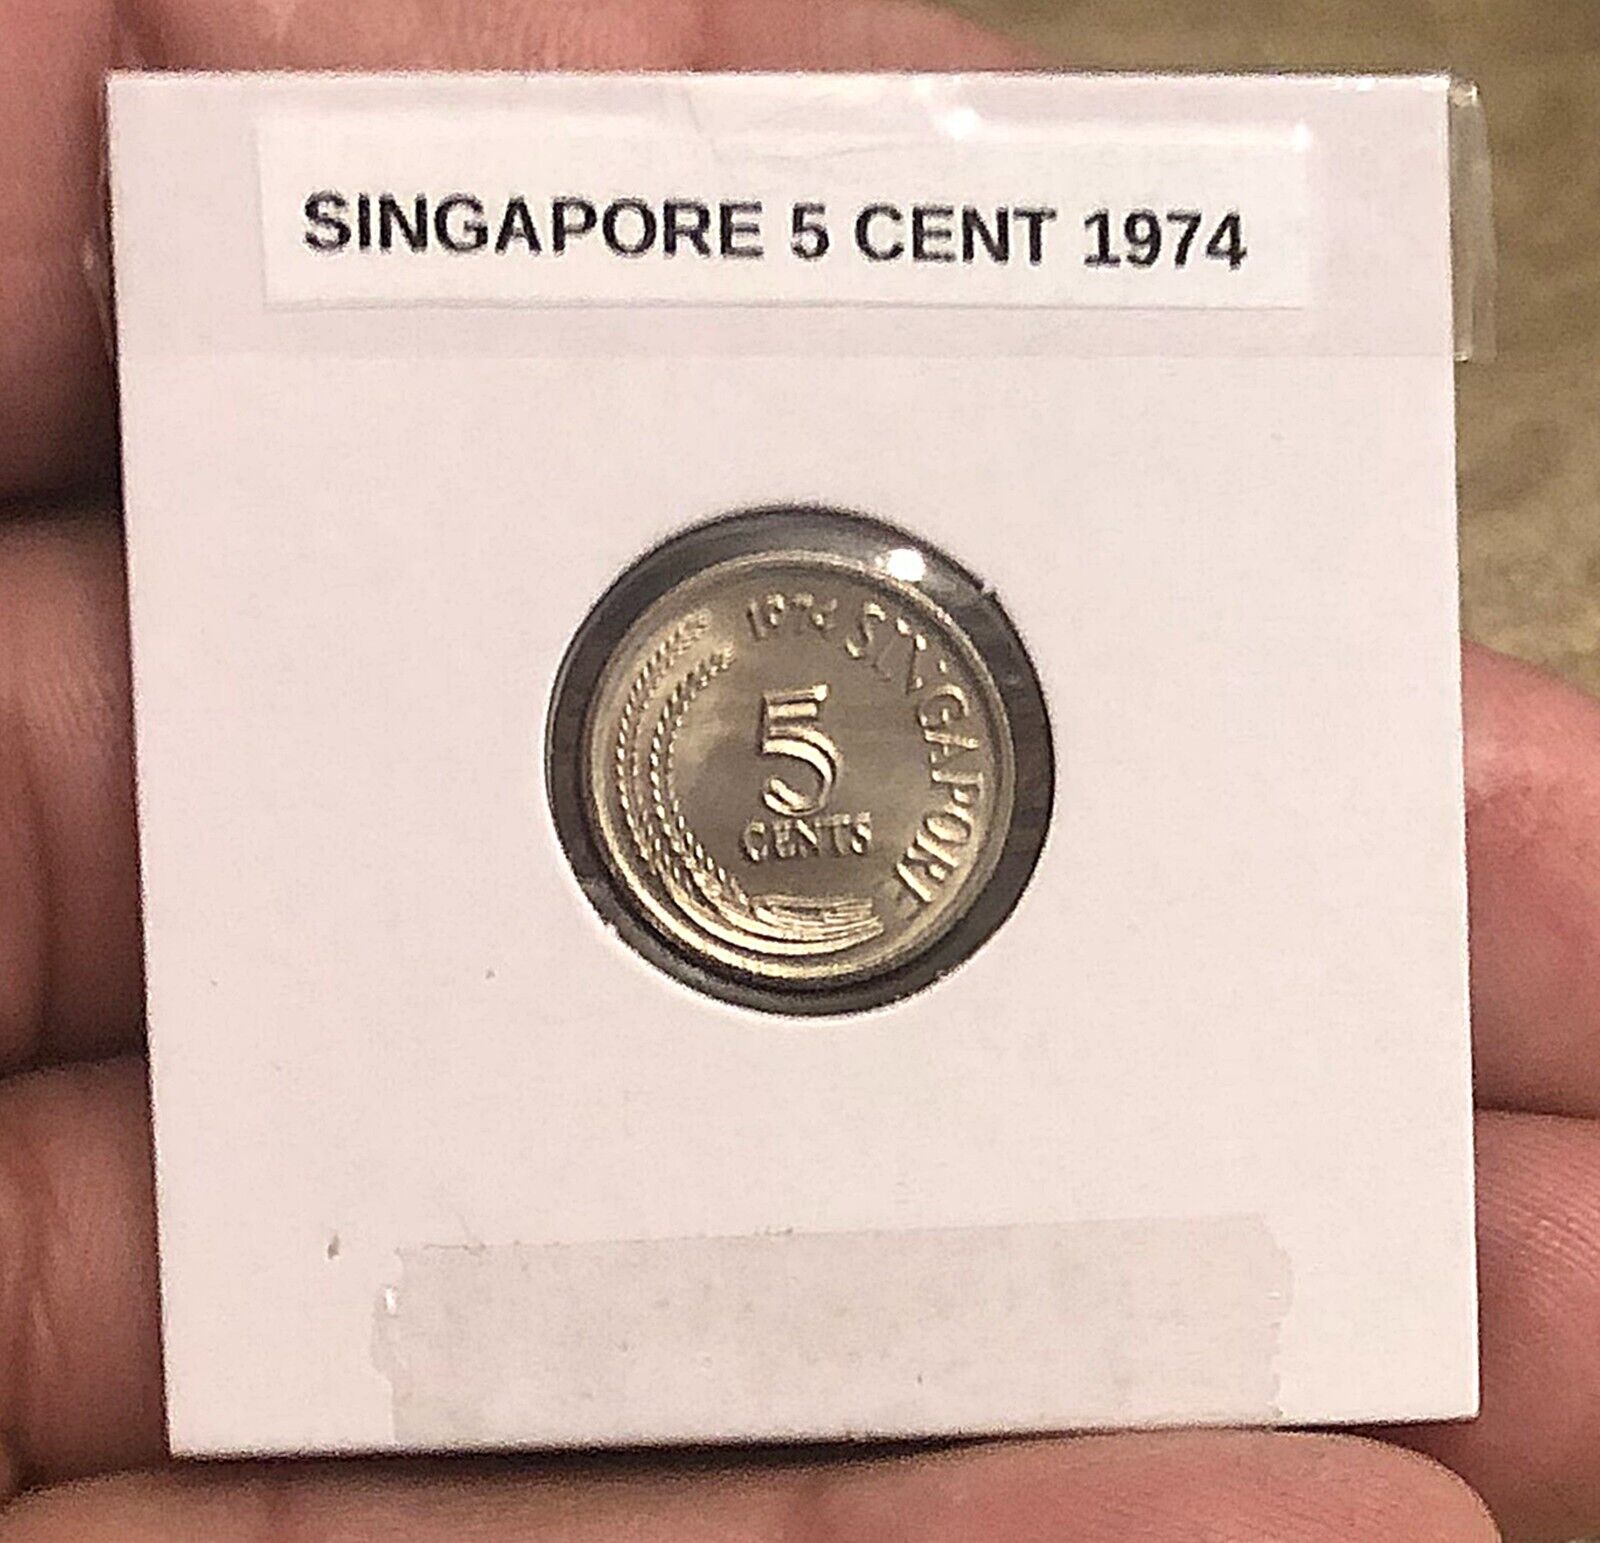 Singapore 1974 - 5 Cents Copper-nickel Coin - Anhinga Or Snake Bird Aunc